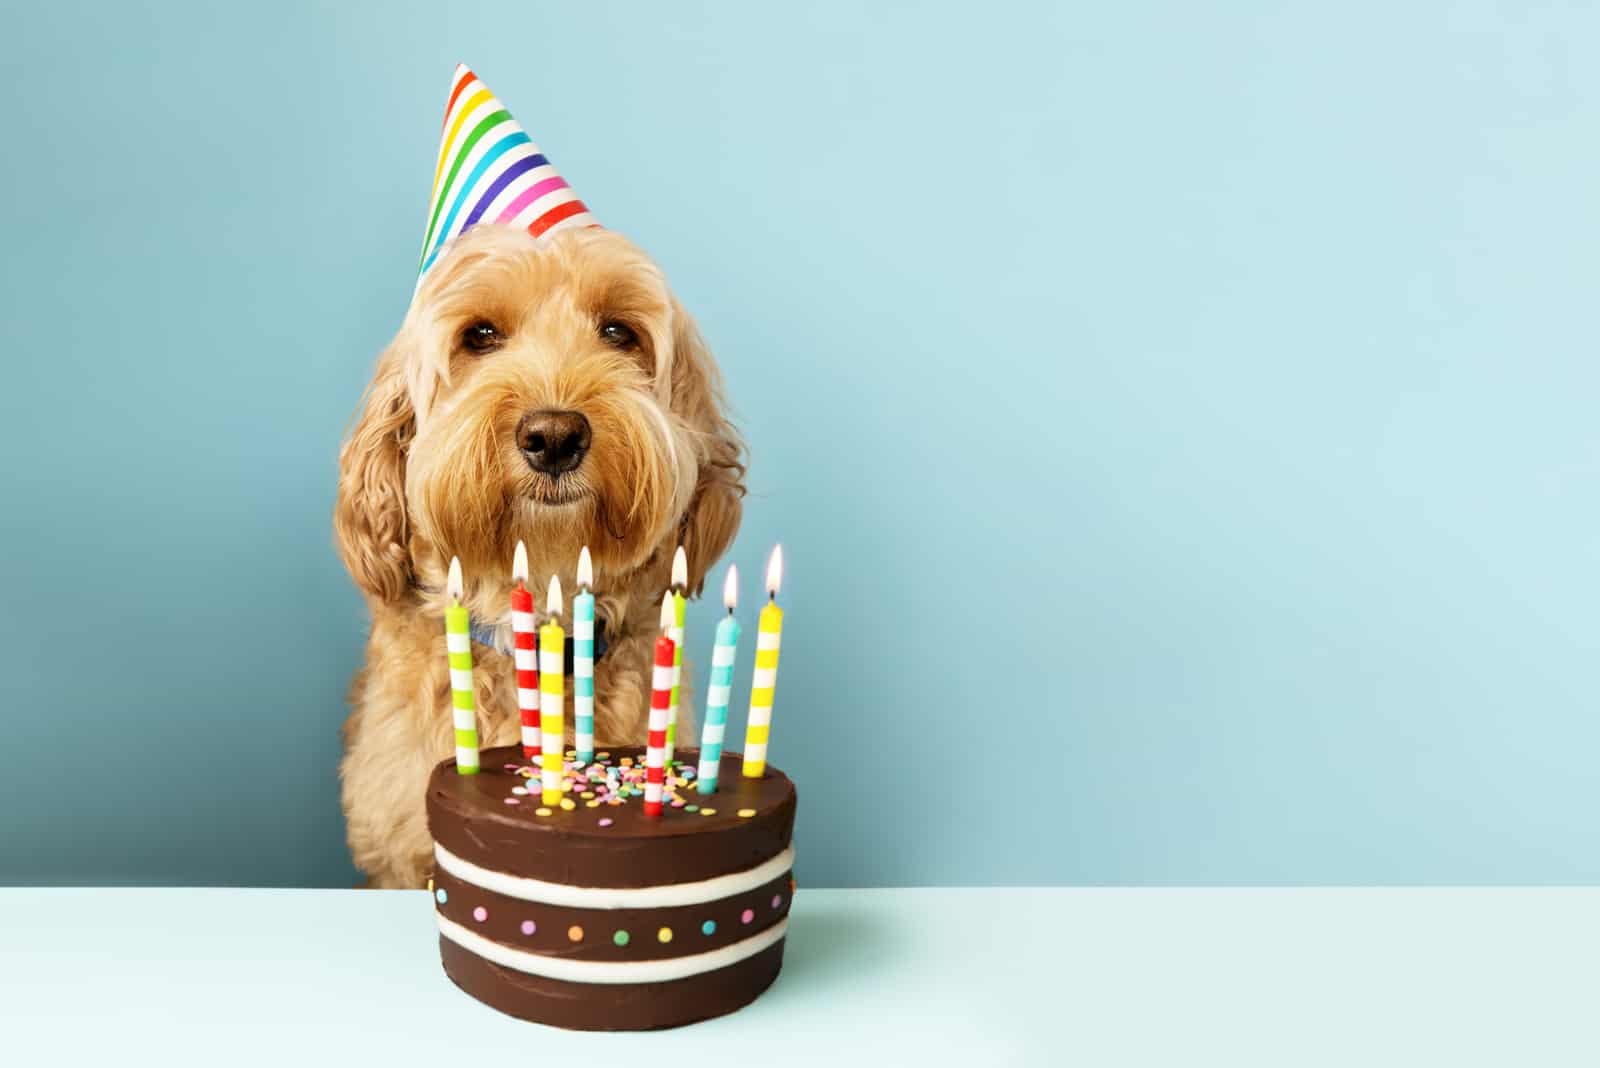 67 Best Dog Birthday Captions & Quotes For Your Furry Friend